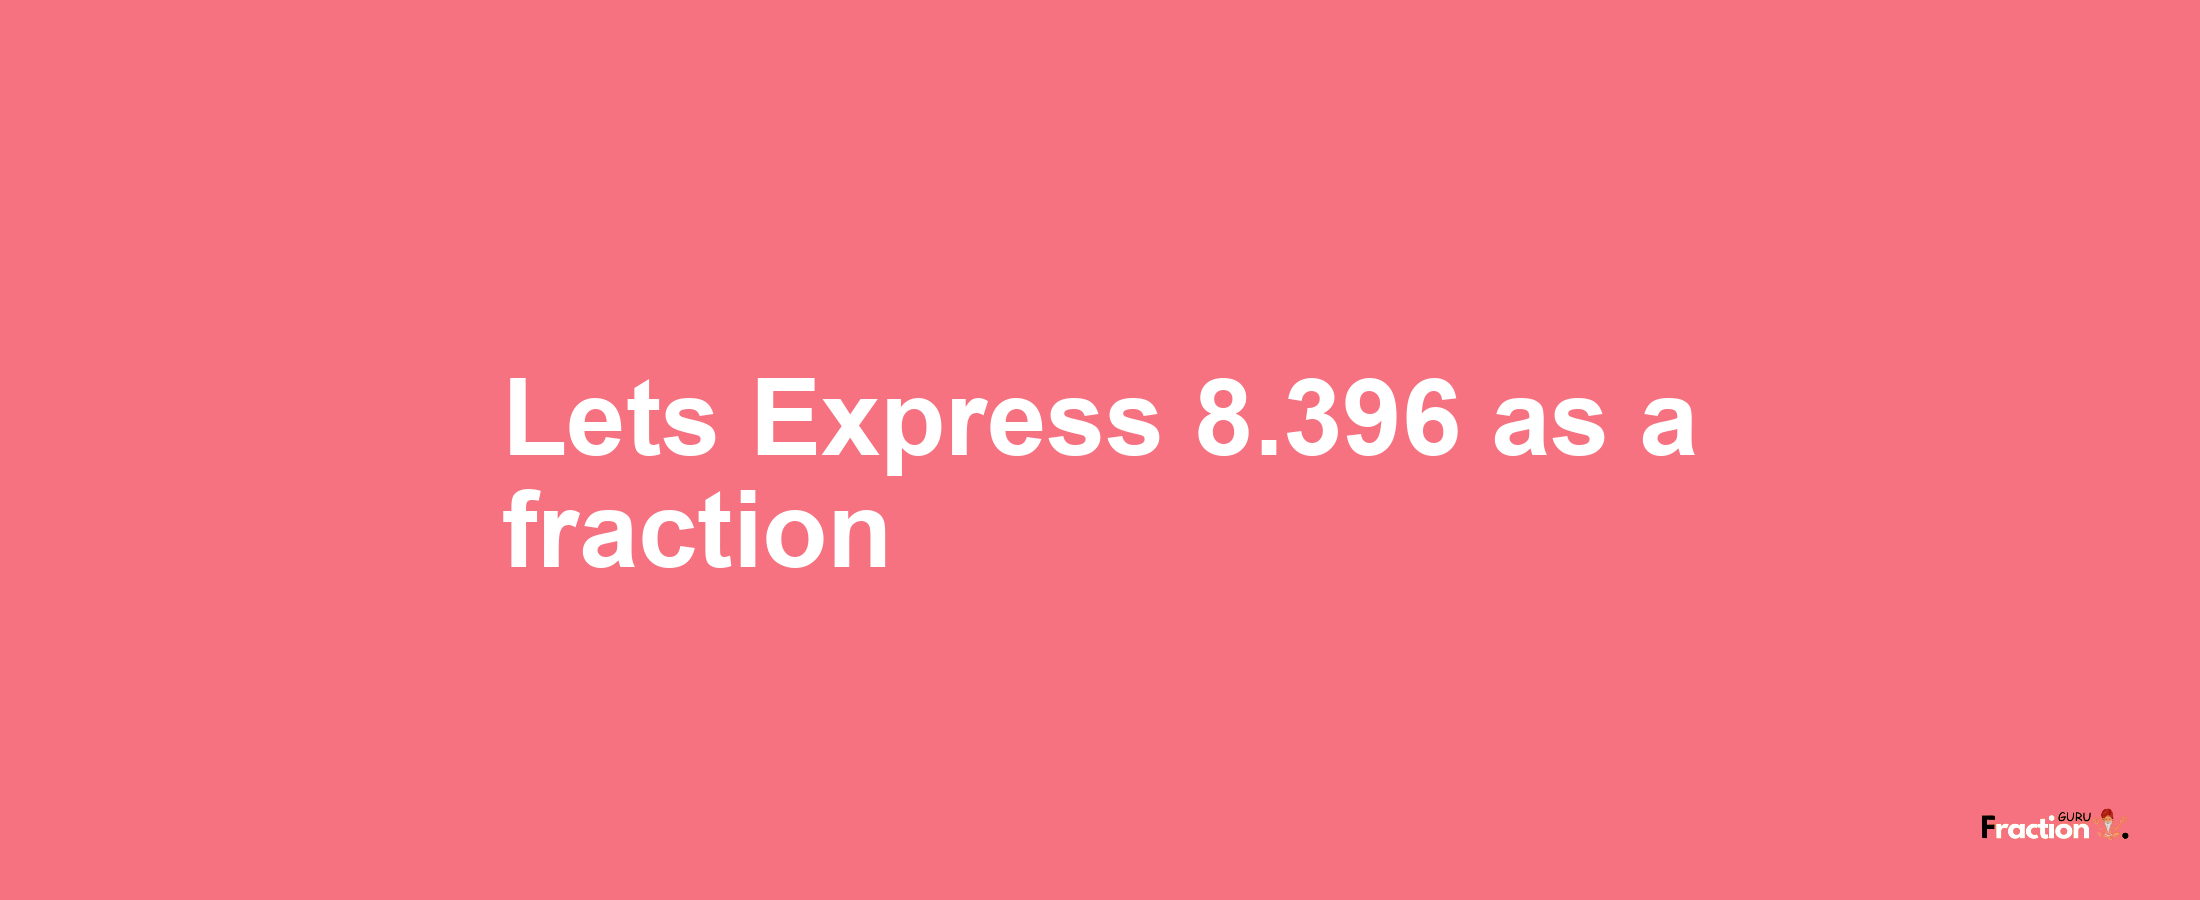 Lets Express 8.396 as afraction